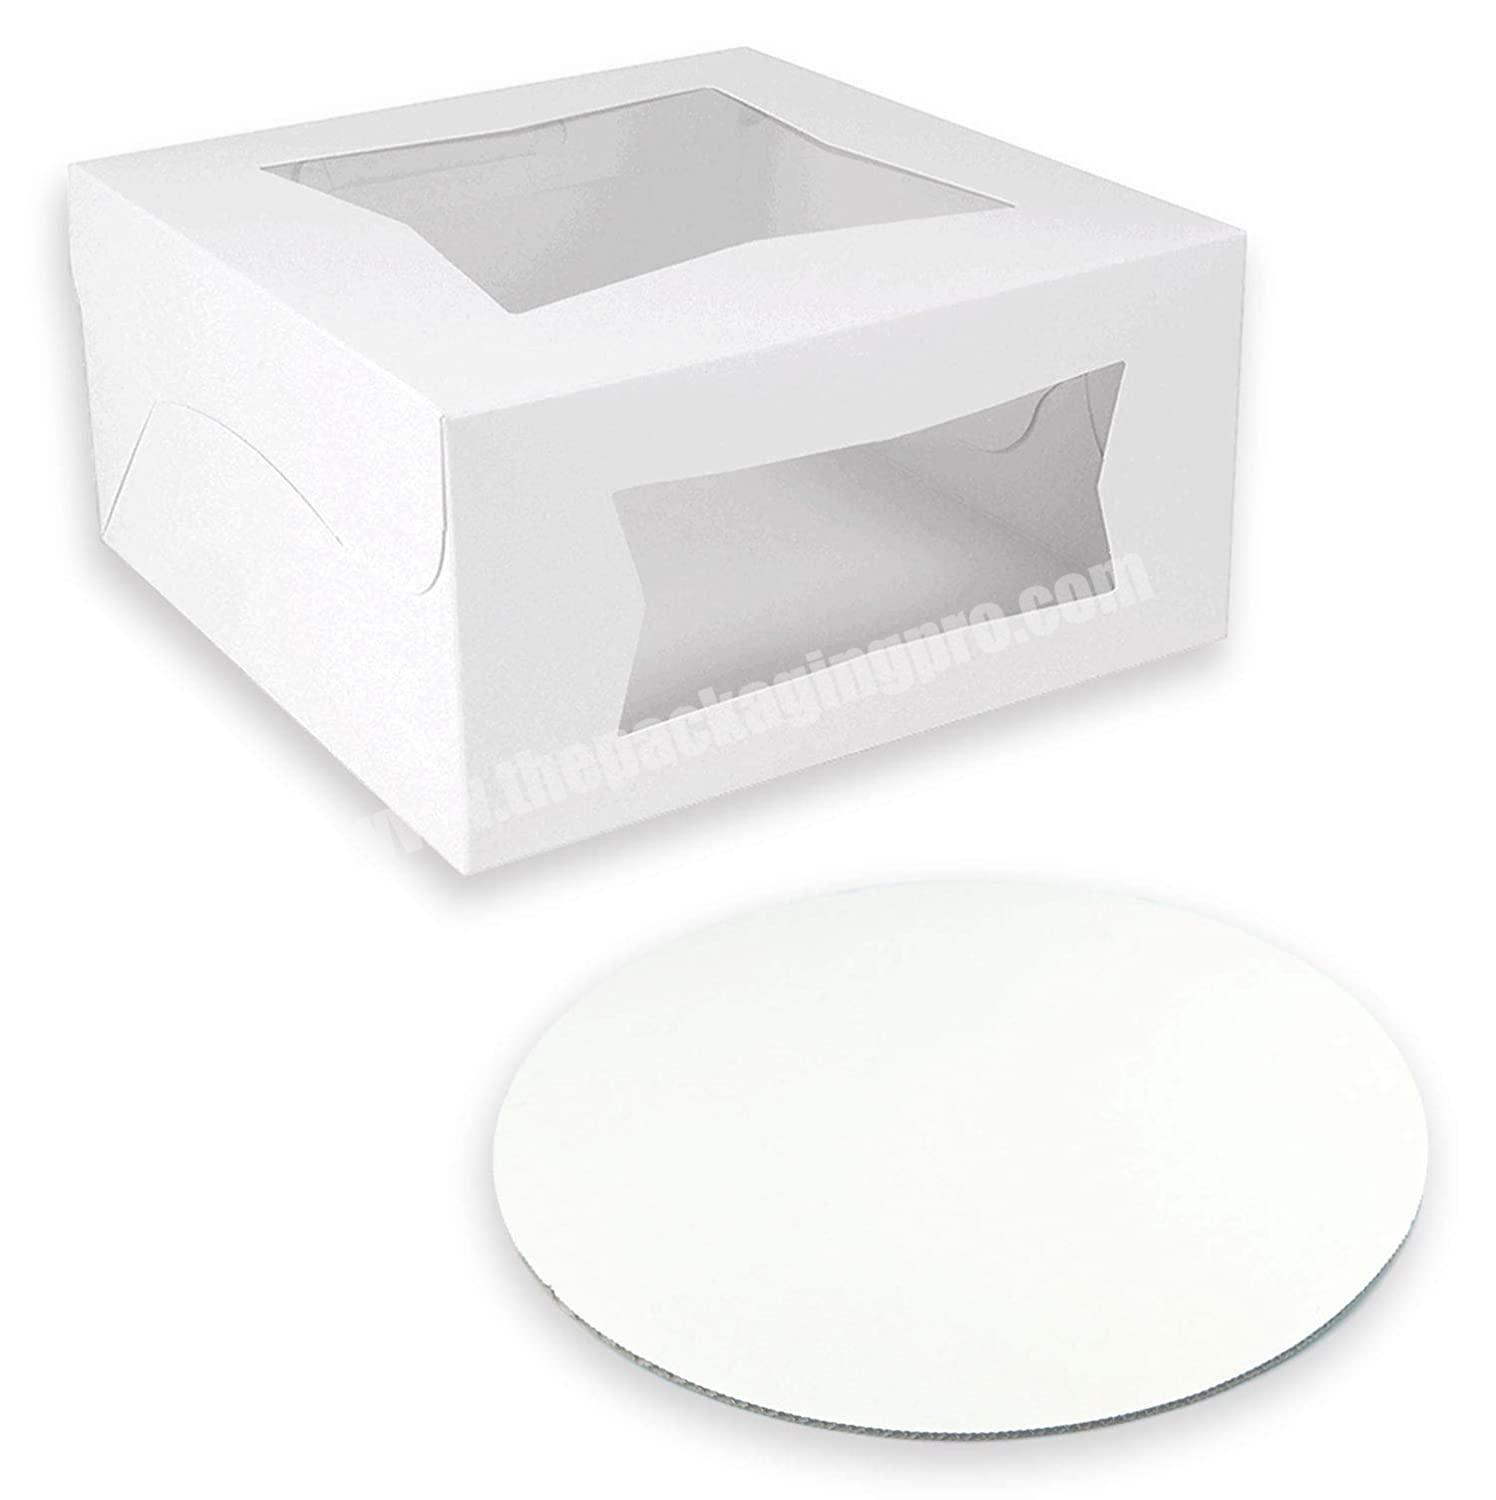 With Window and 8 Inch Round Base Board Cardboard Gift Packaging for Cupcake cookie and Pastry Auto 8x8x4 White Cake Box